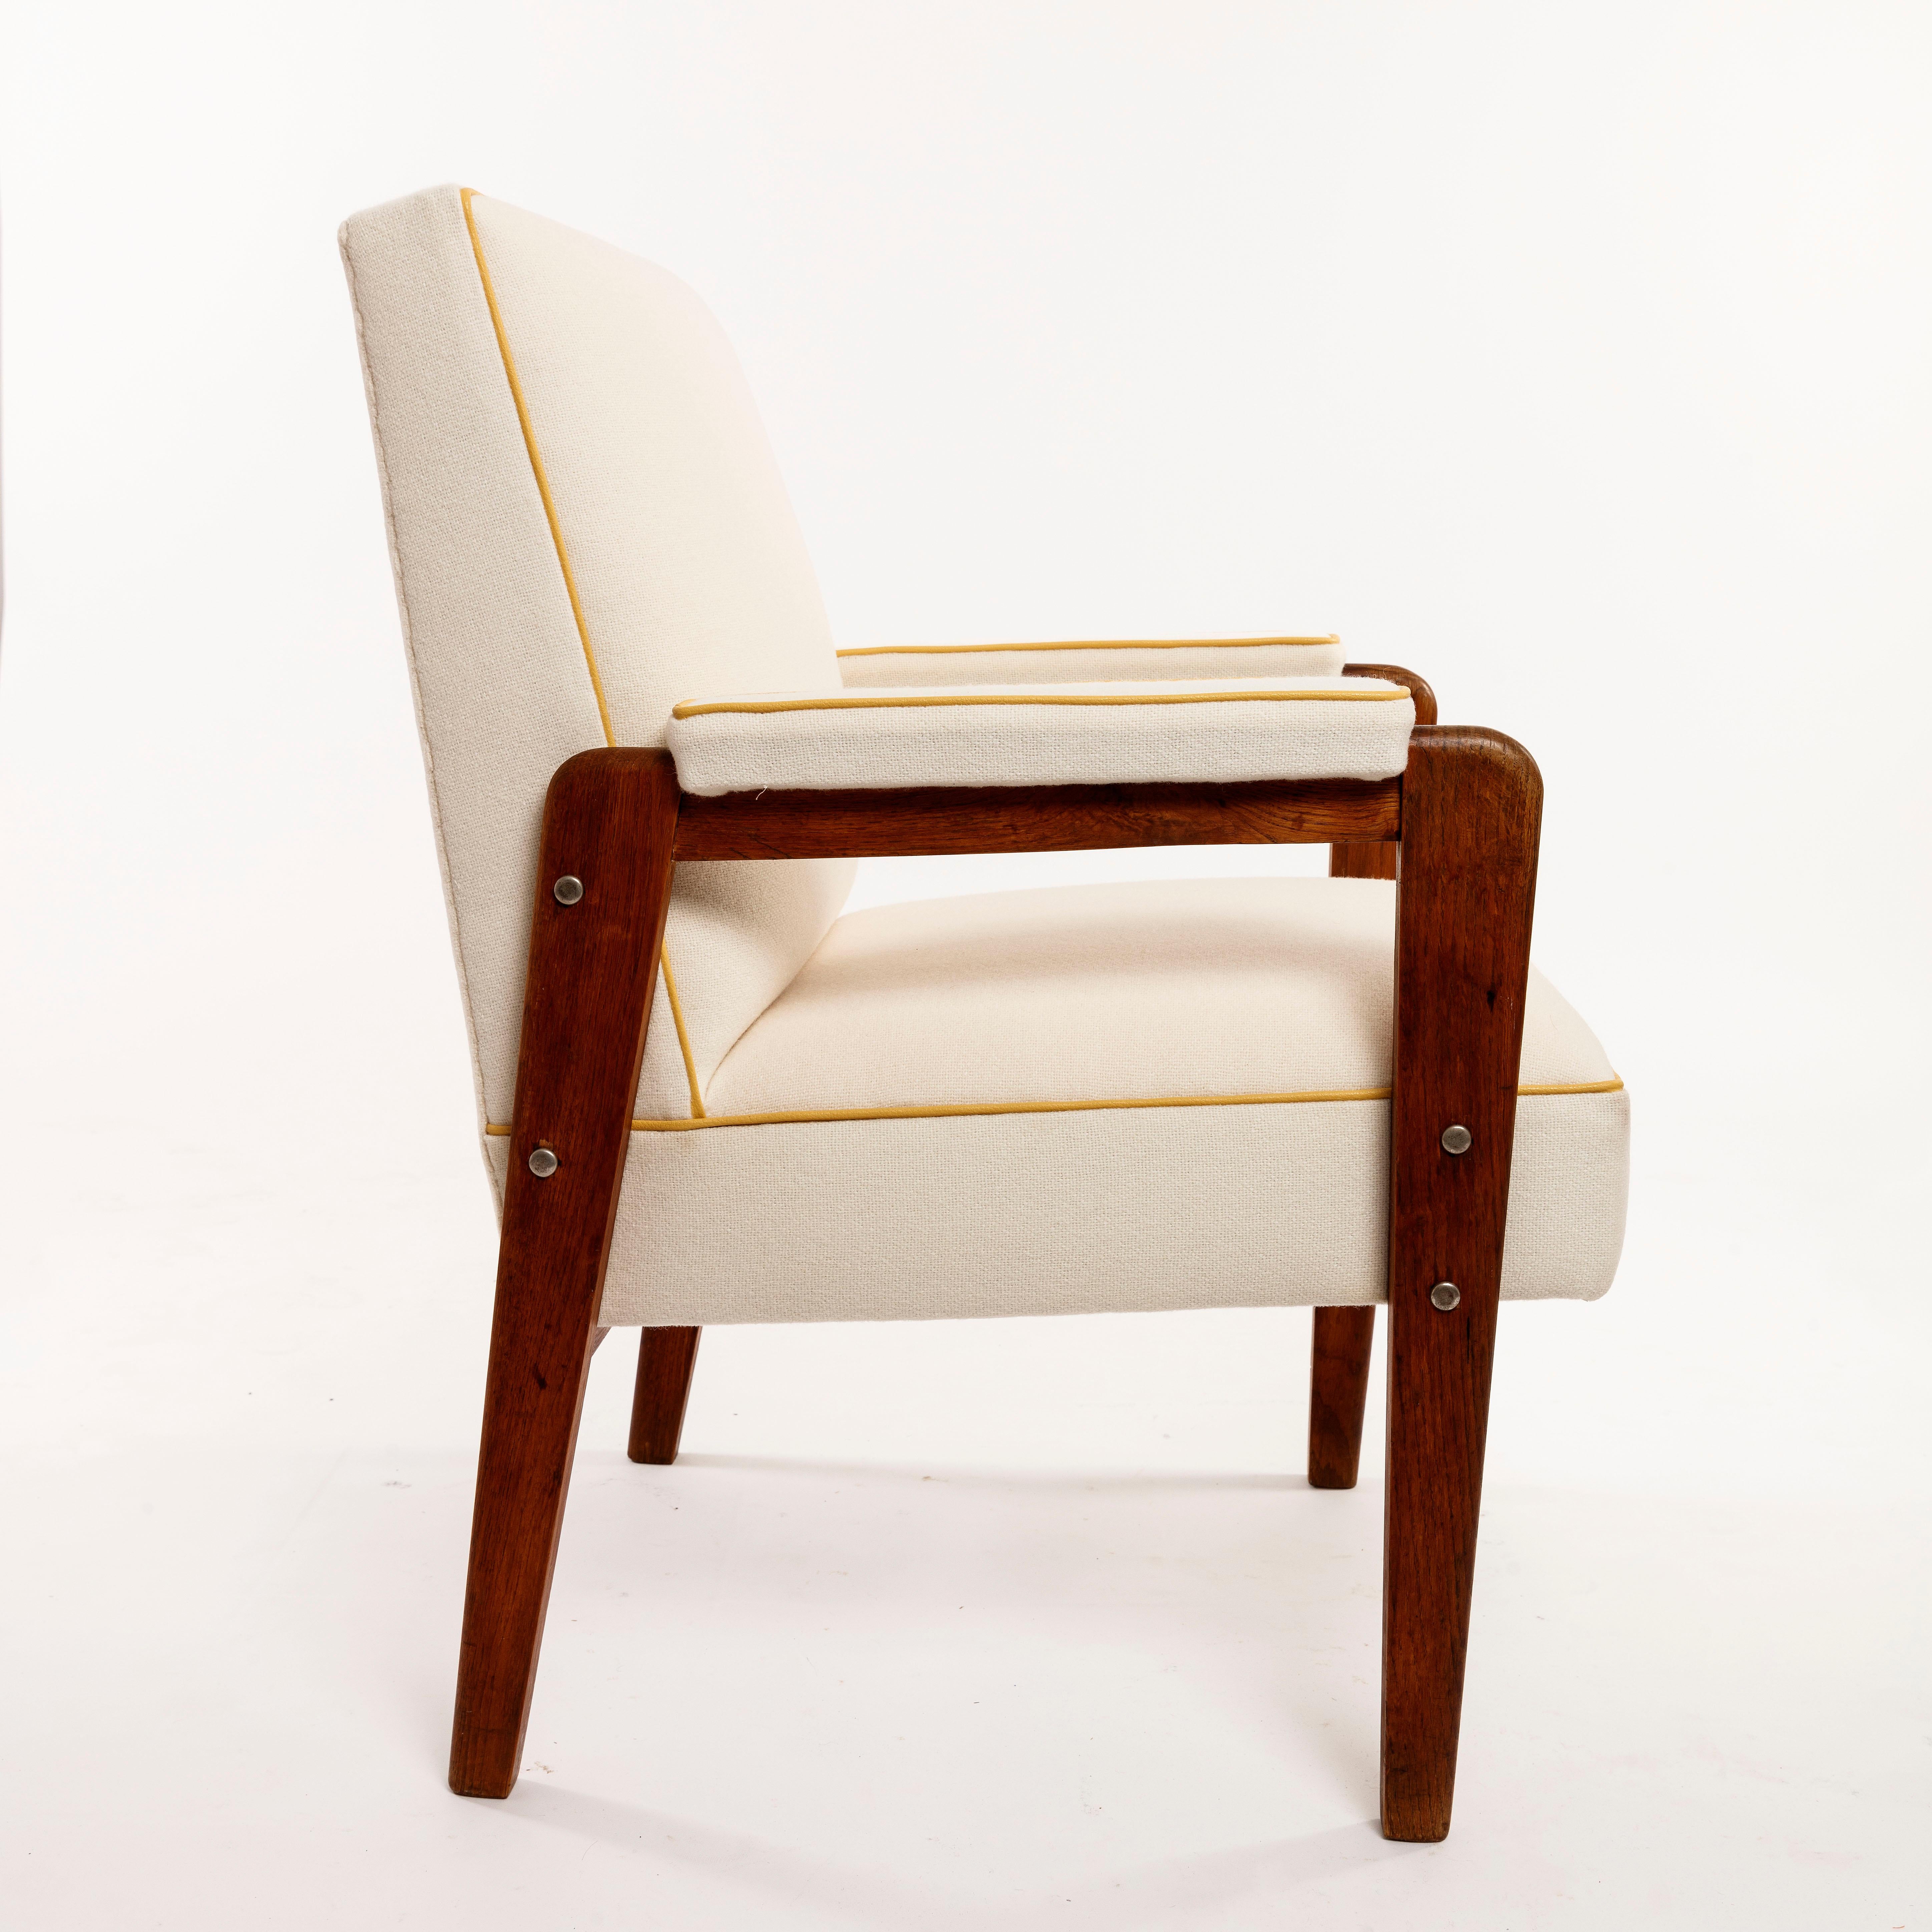 Marcel Gascoin Armchair Created in 1950 for the Cité Universitaire Antony France For Sale 2